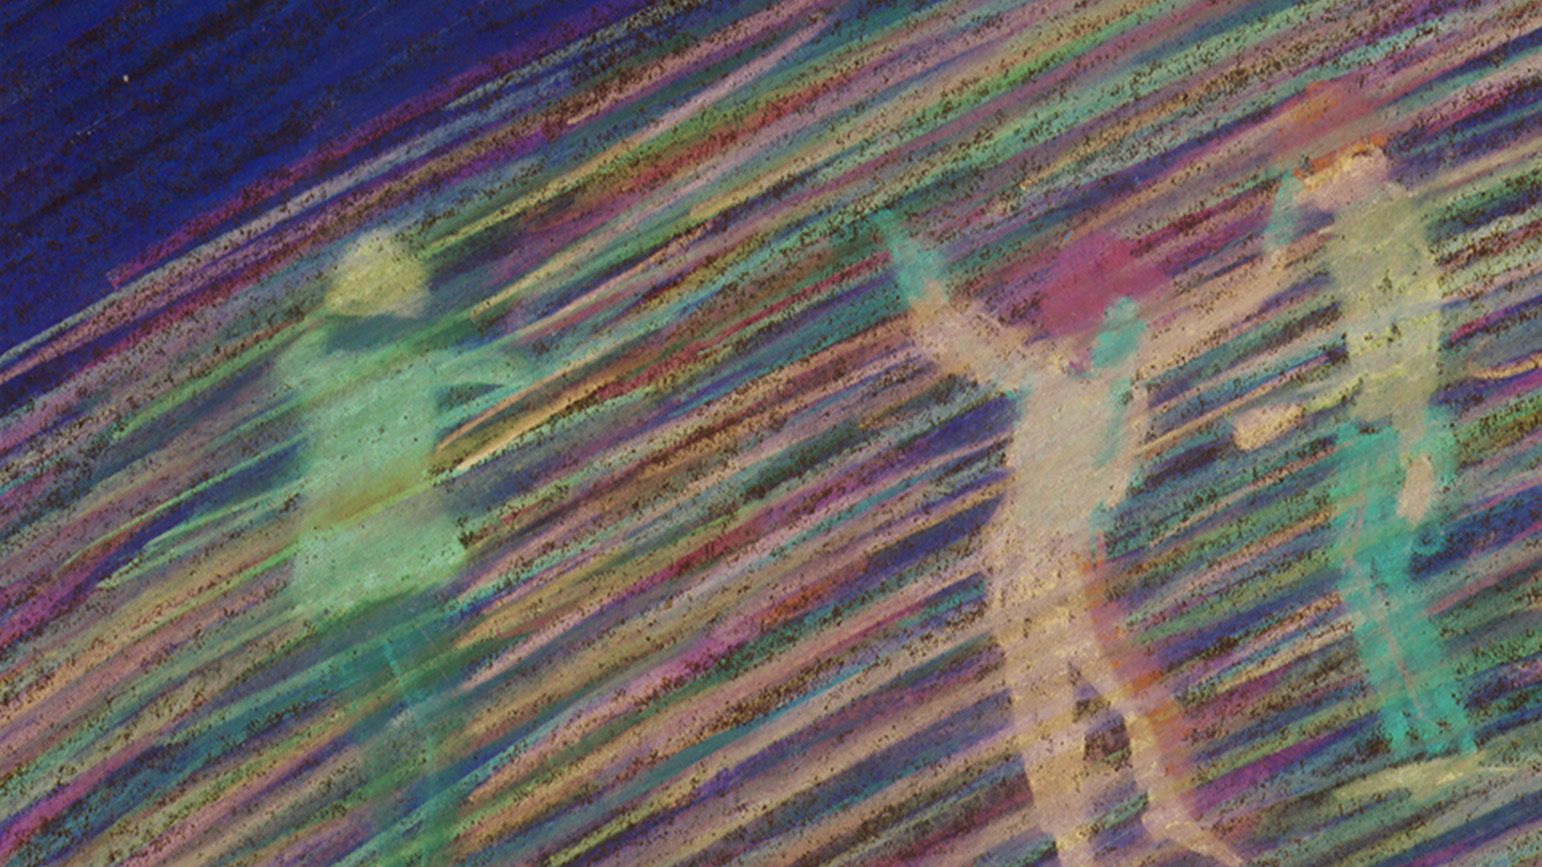 Still from "Tugging the Worm" showing hand drawn figures against a streaked colorful background